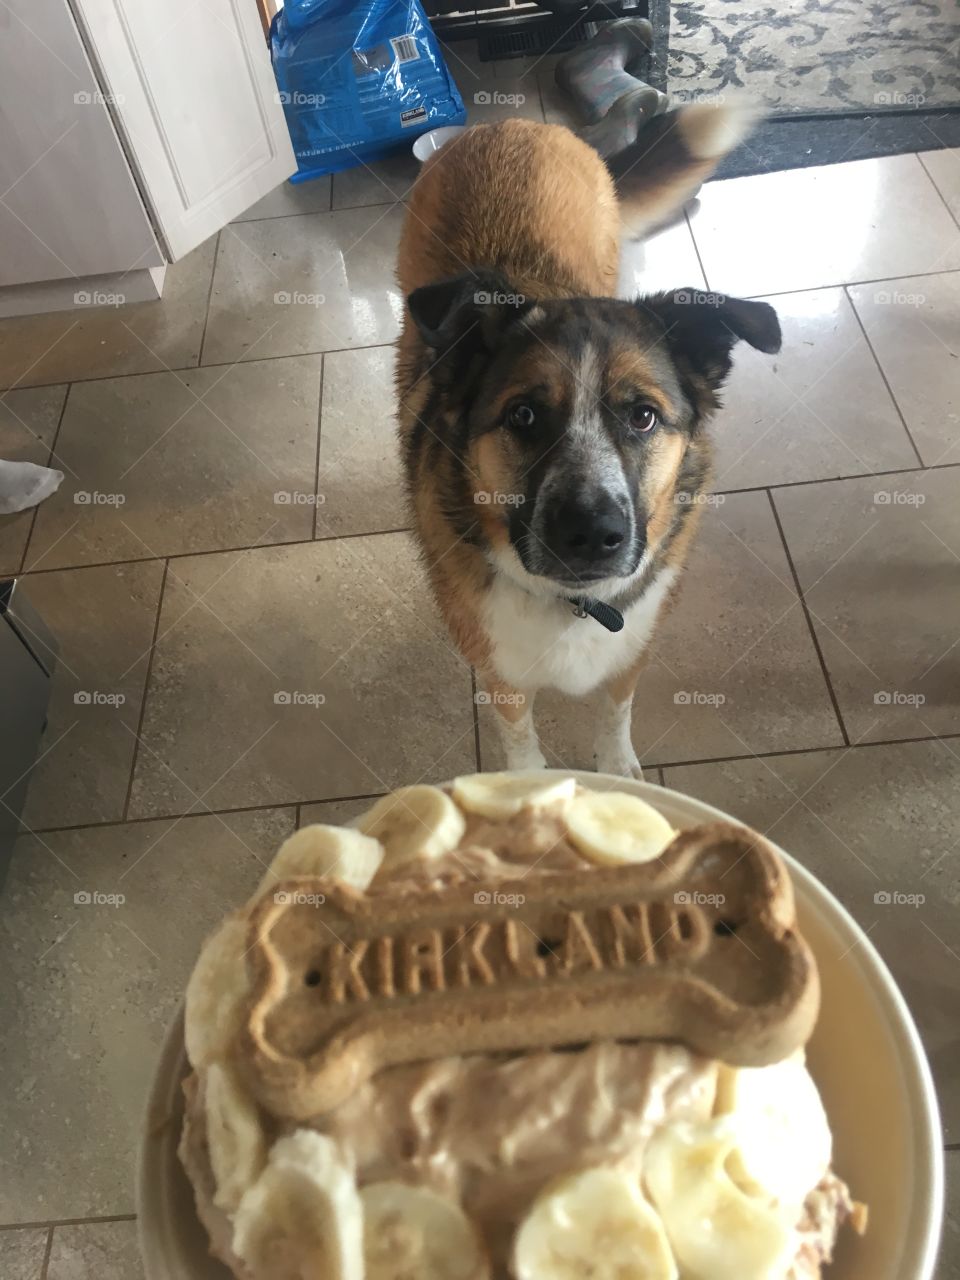 A dog looks up expectantly as her owner (not shown) holds a cake topped with bananas and a dog biscuit